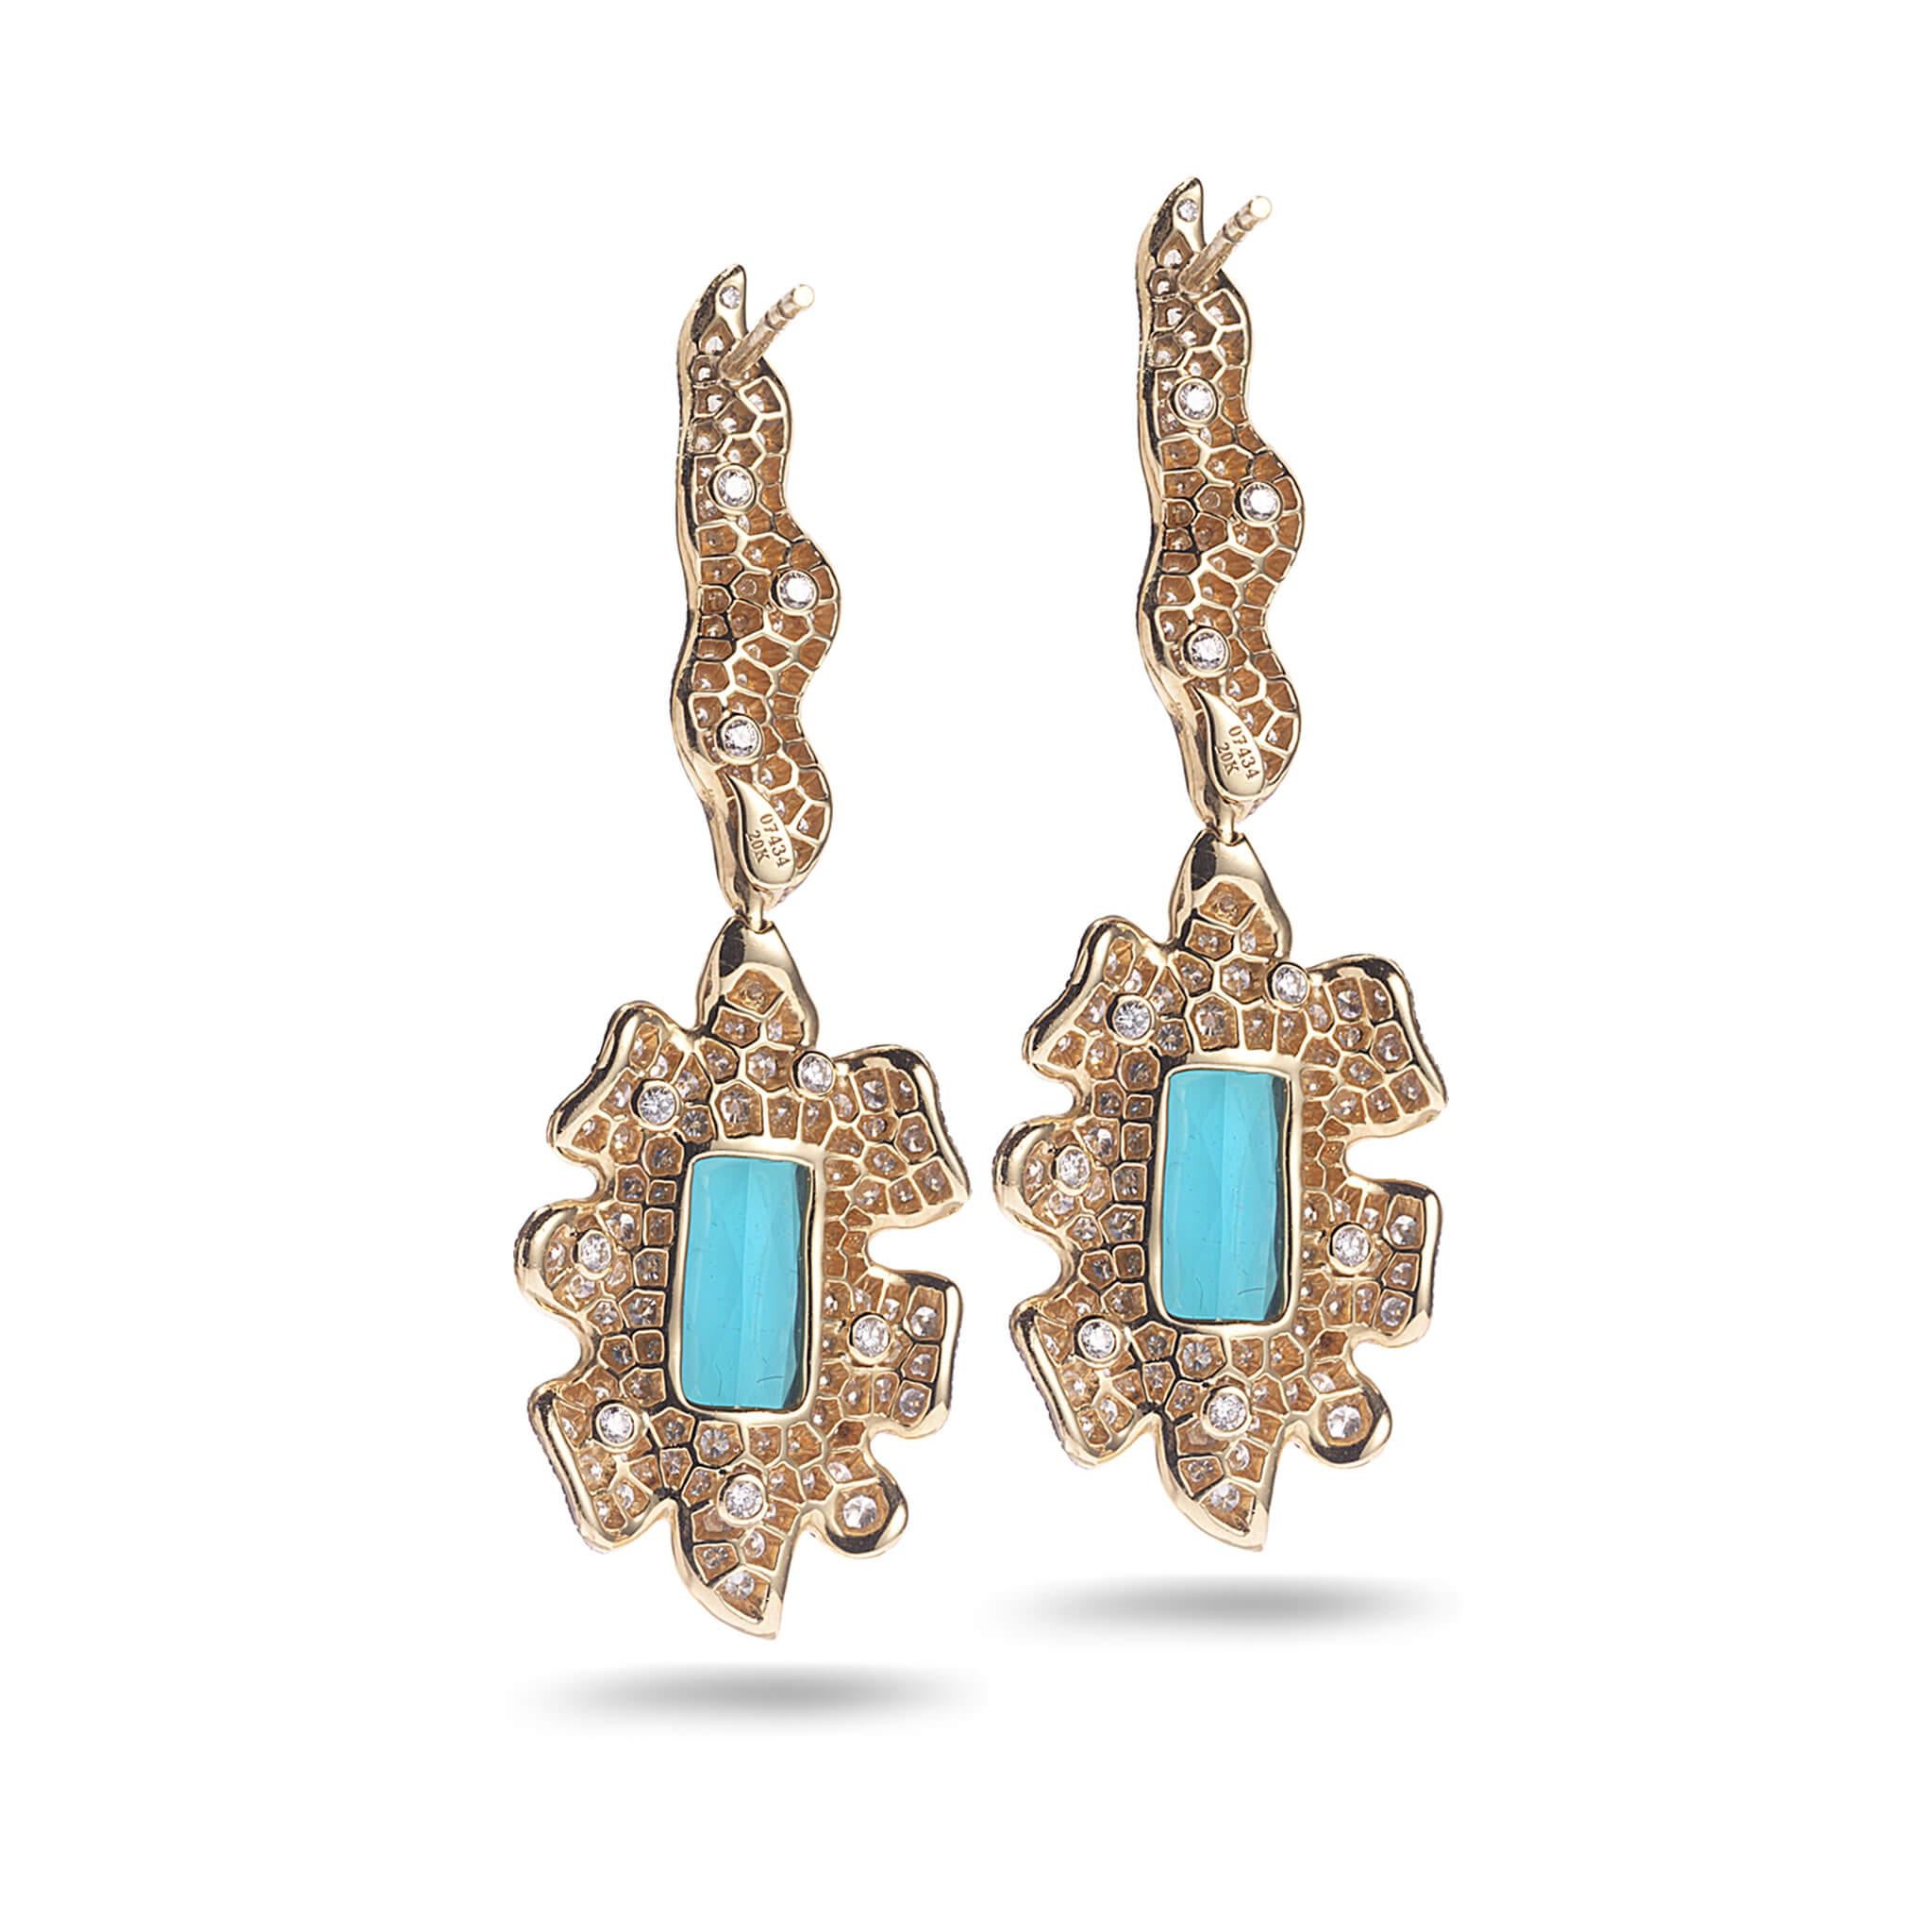 Affinity drop earrings set in 20K yellow gold with 10.69cts blue tourmaline and 4.86cts diamond.
